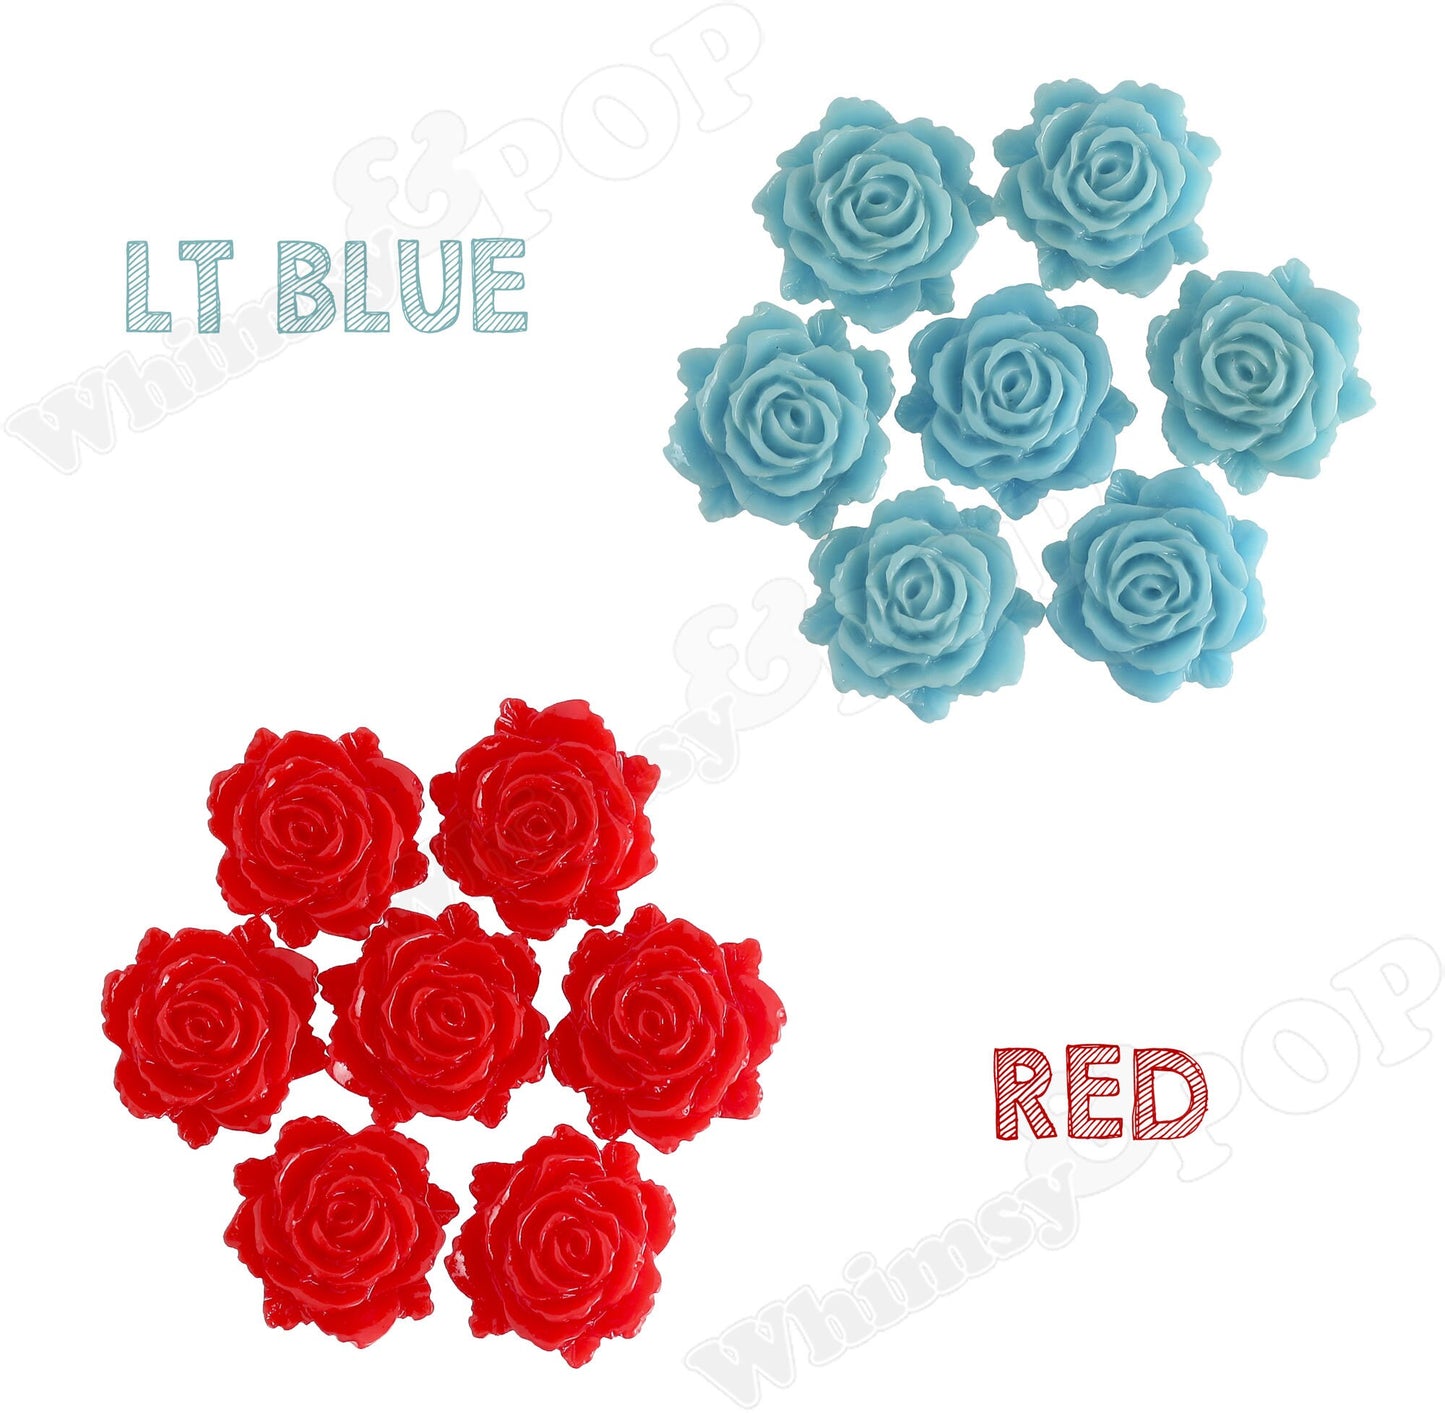 12MM Flower Cabochons, Bloomin' Rose Cabochons